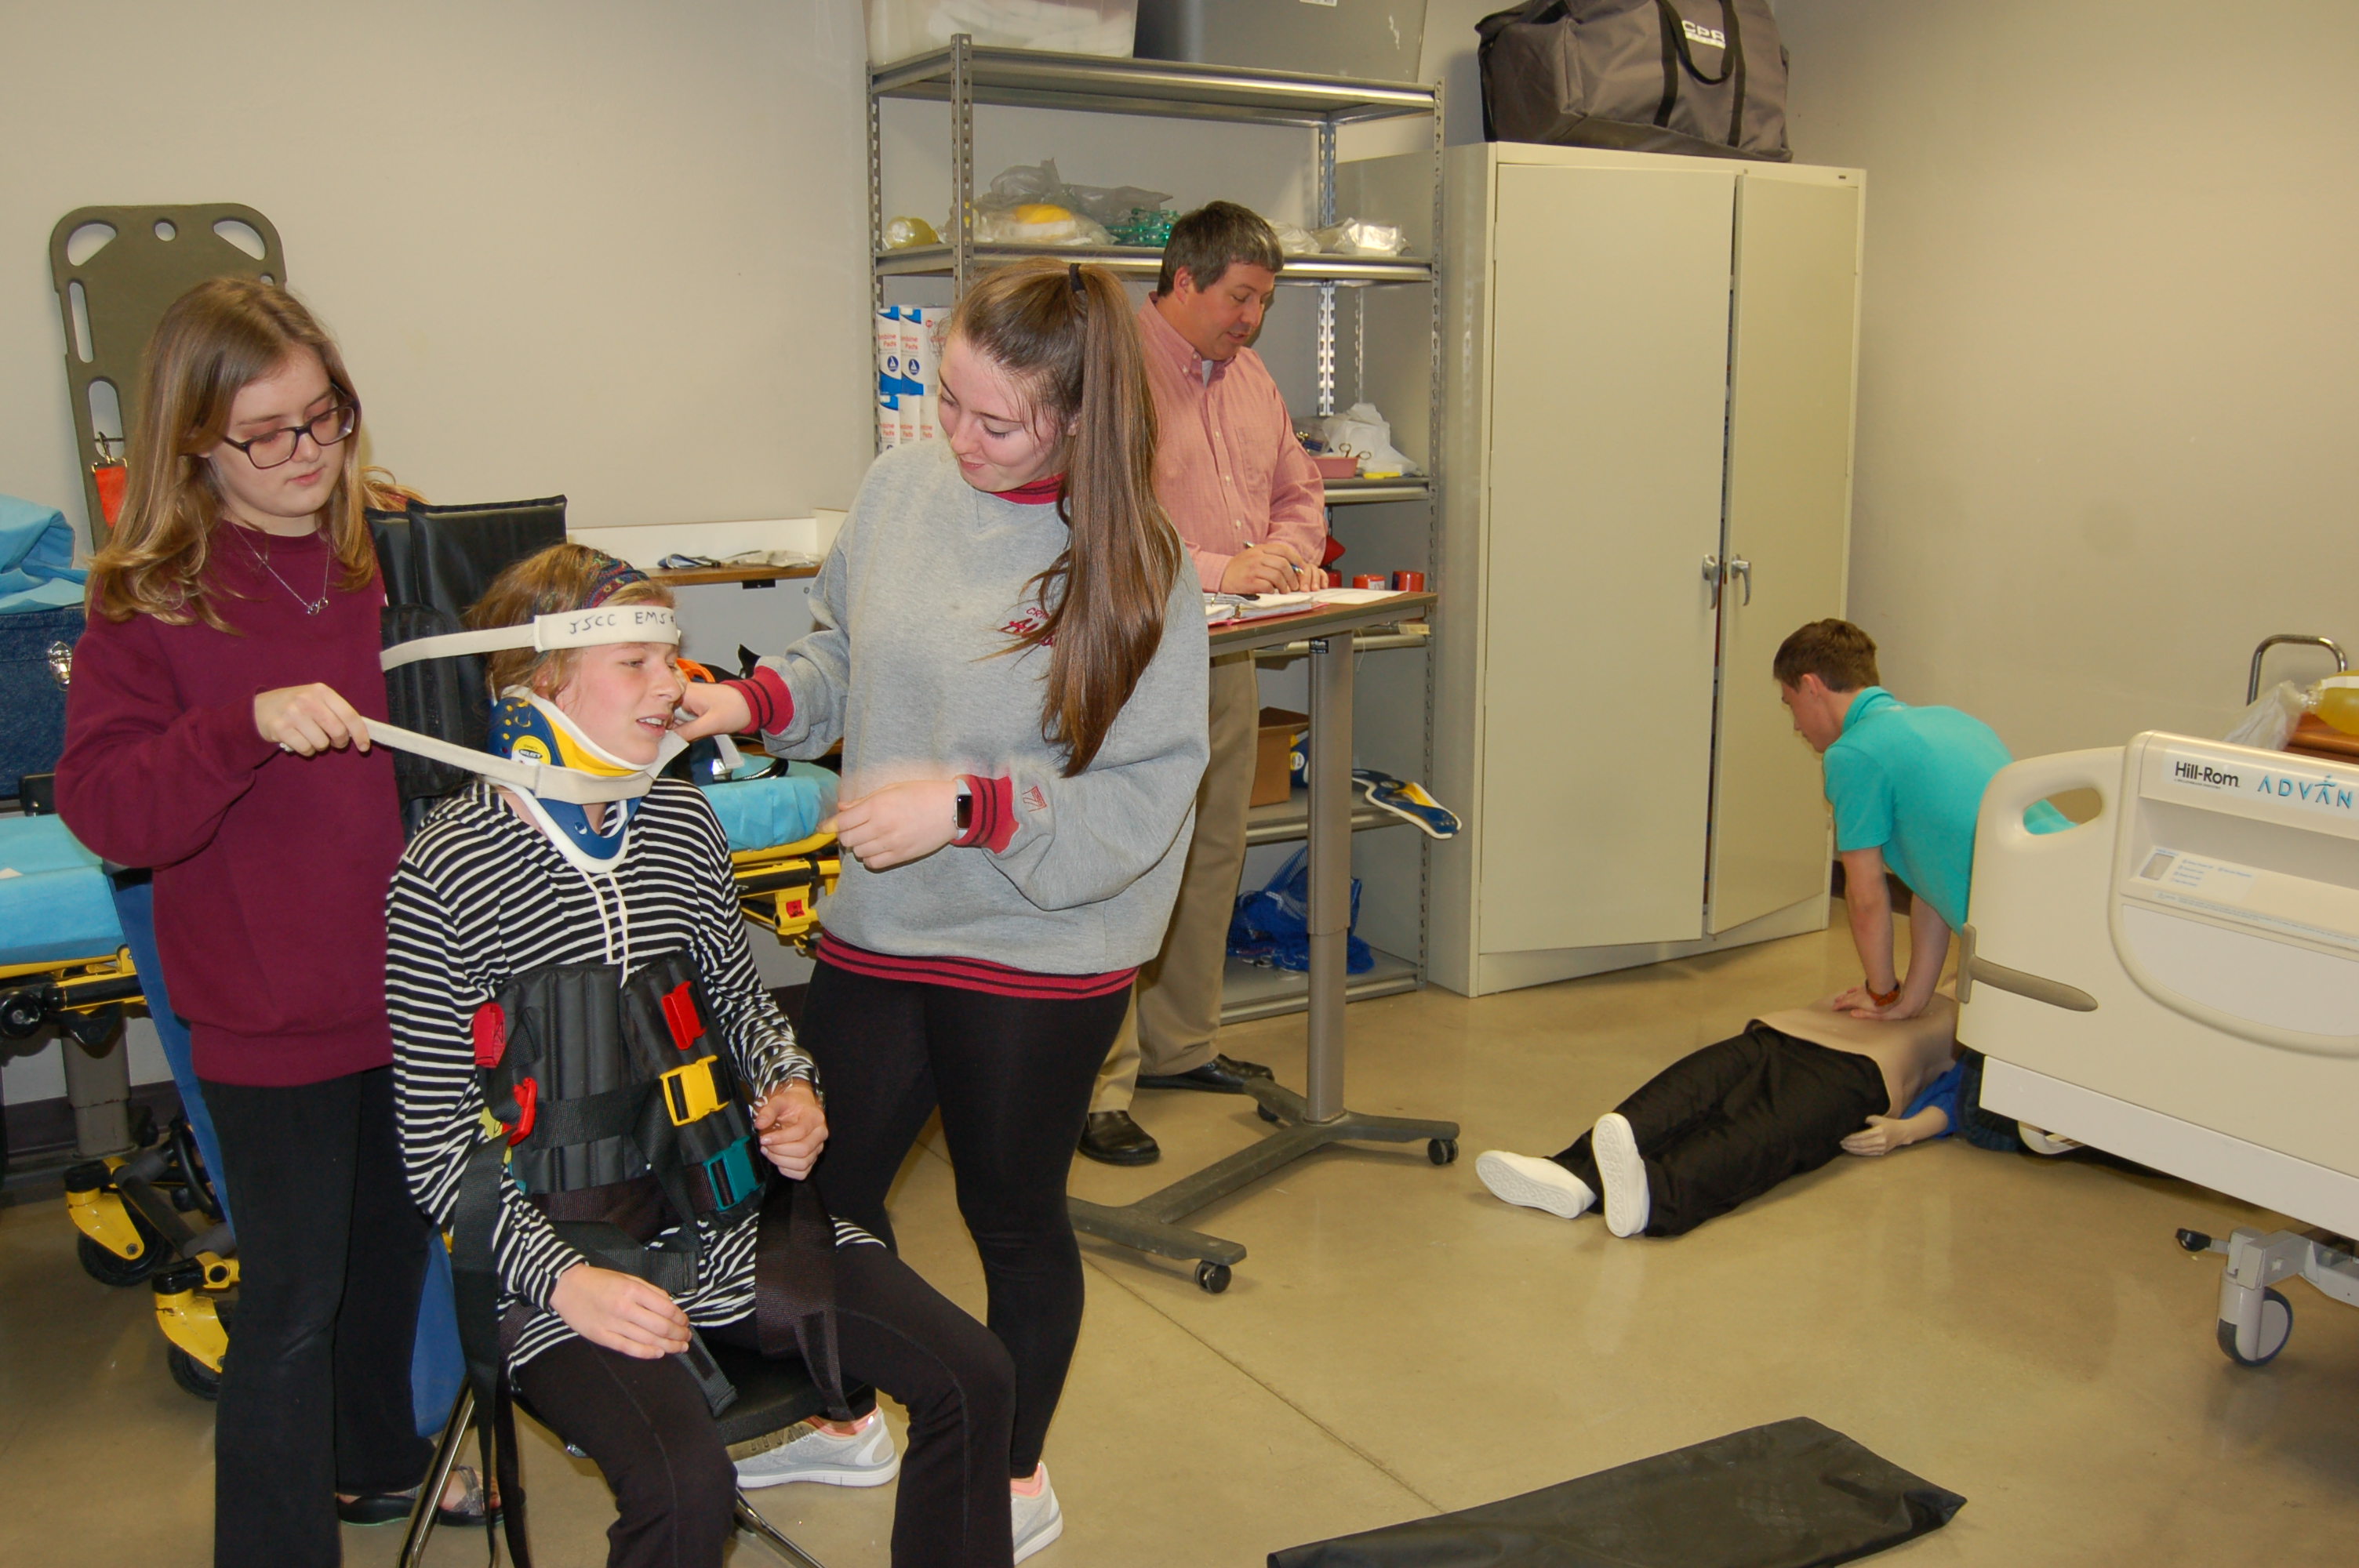 HTHS emergency medical technician class prepares students for healthcare careers